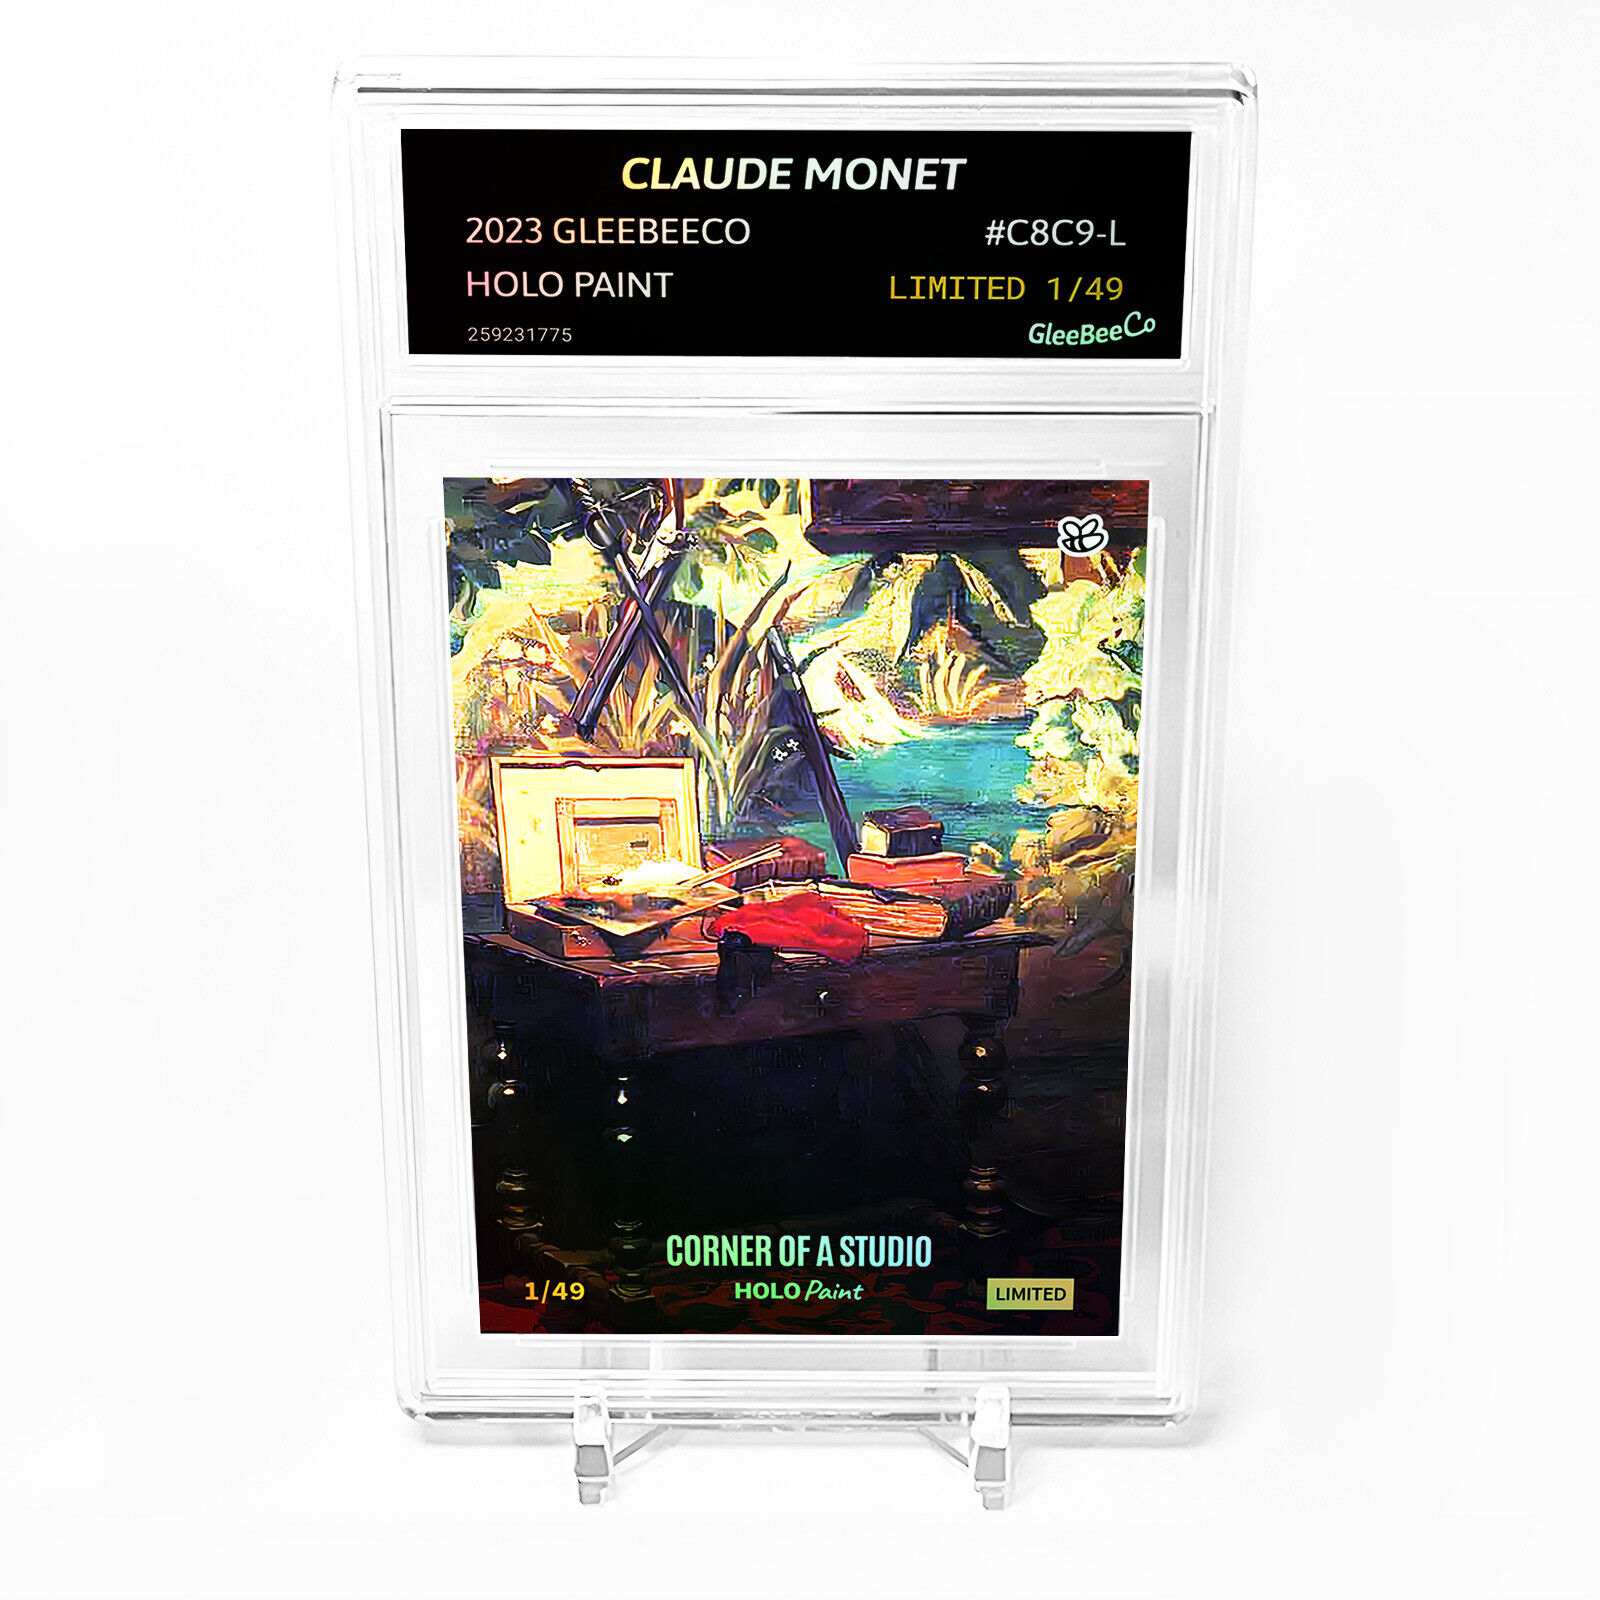 CORNER OF A STUDIO Holographic Card 2023 GleeBeeCo #C8C9-L LIMITED to /49